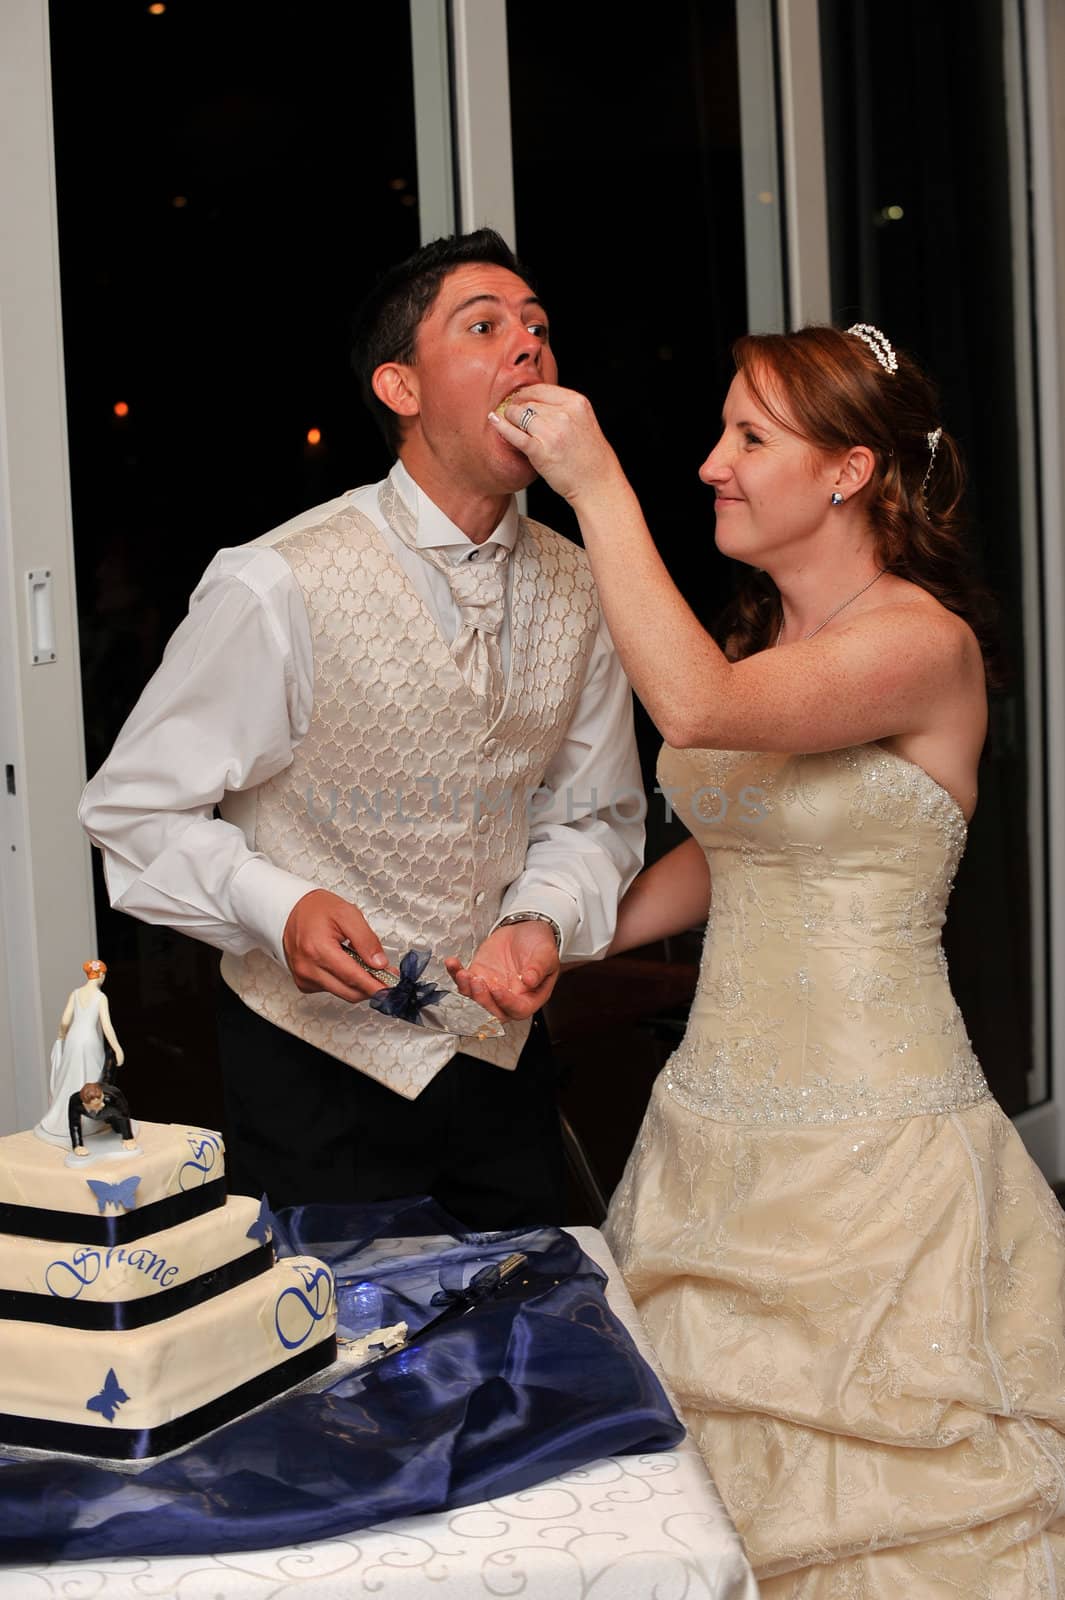 Bride feeding the groom wedding cake with her hand and smiling by Ansunette